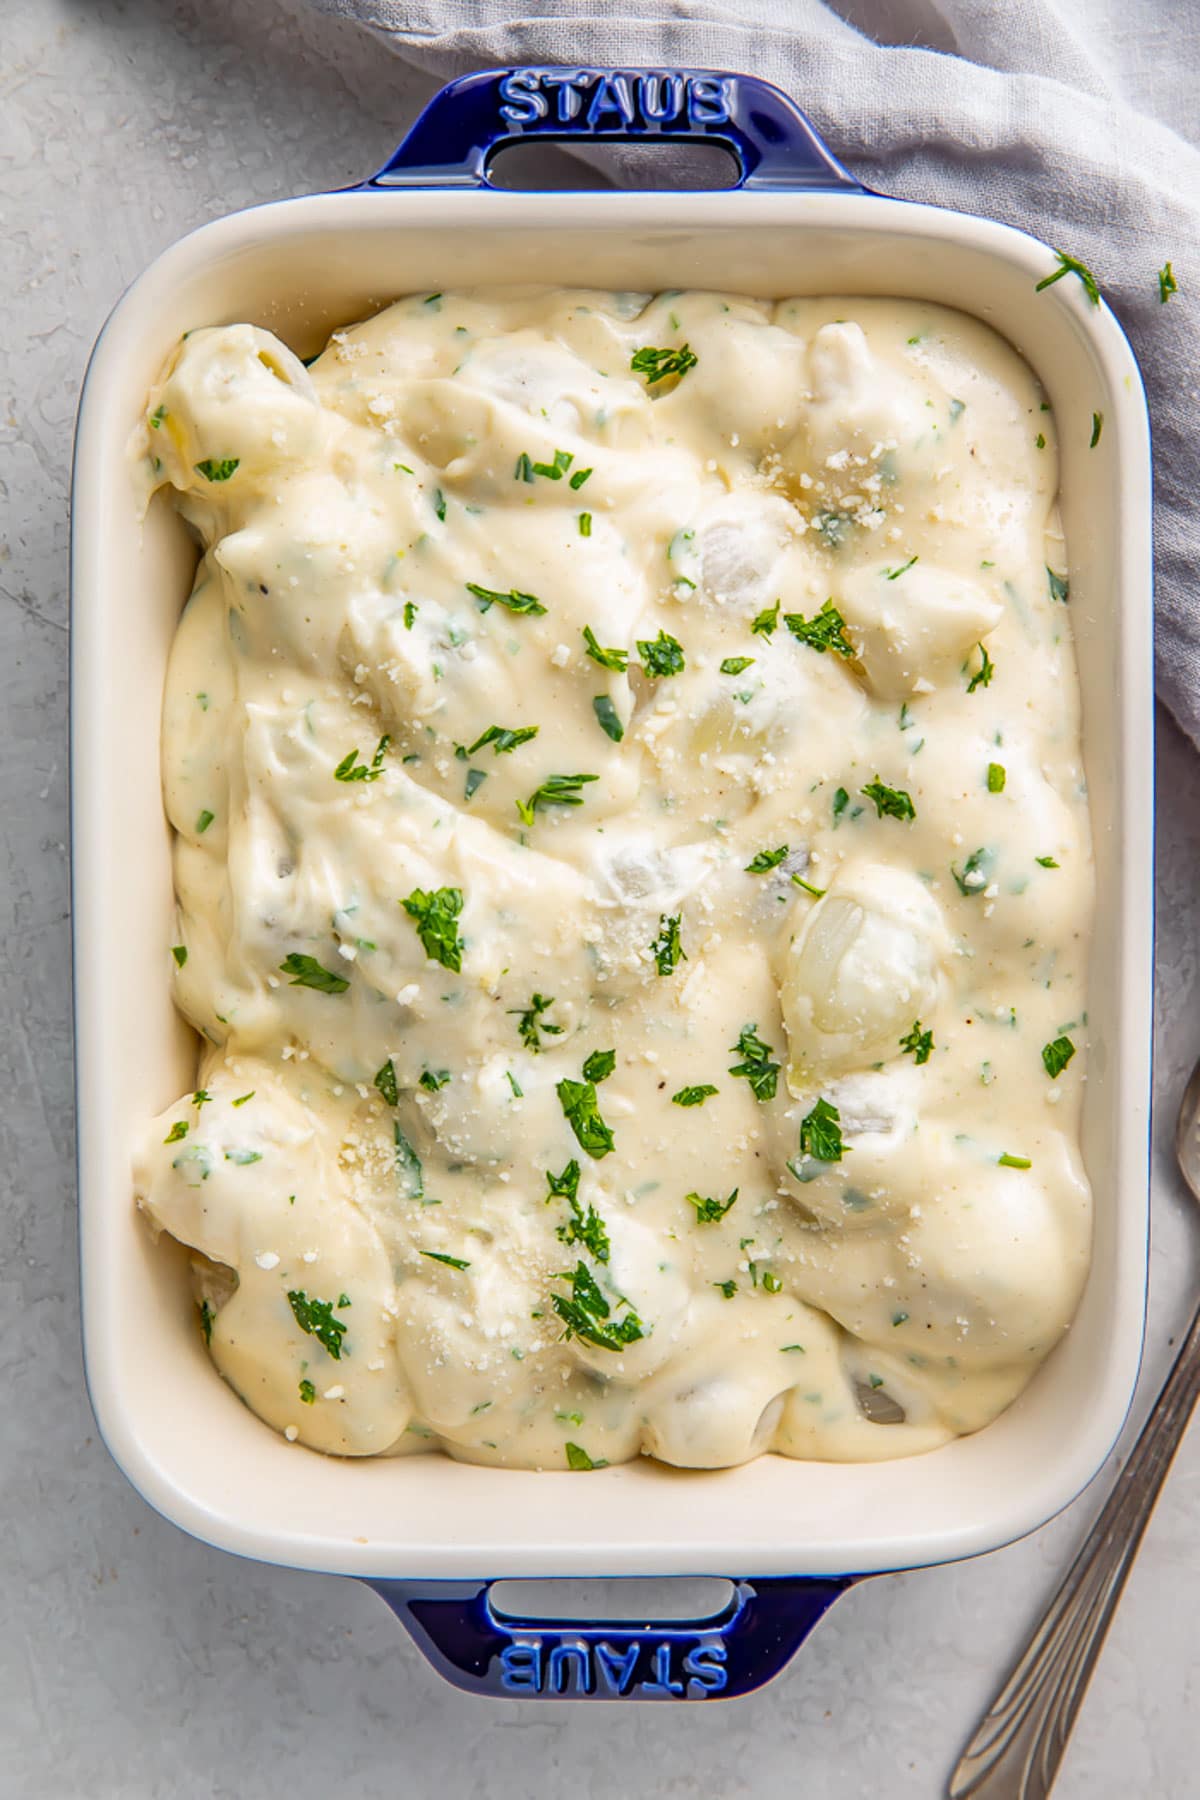 Overhead photo of a casserole dish holding rich creamed onions garnished with fresh herbs.